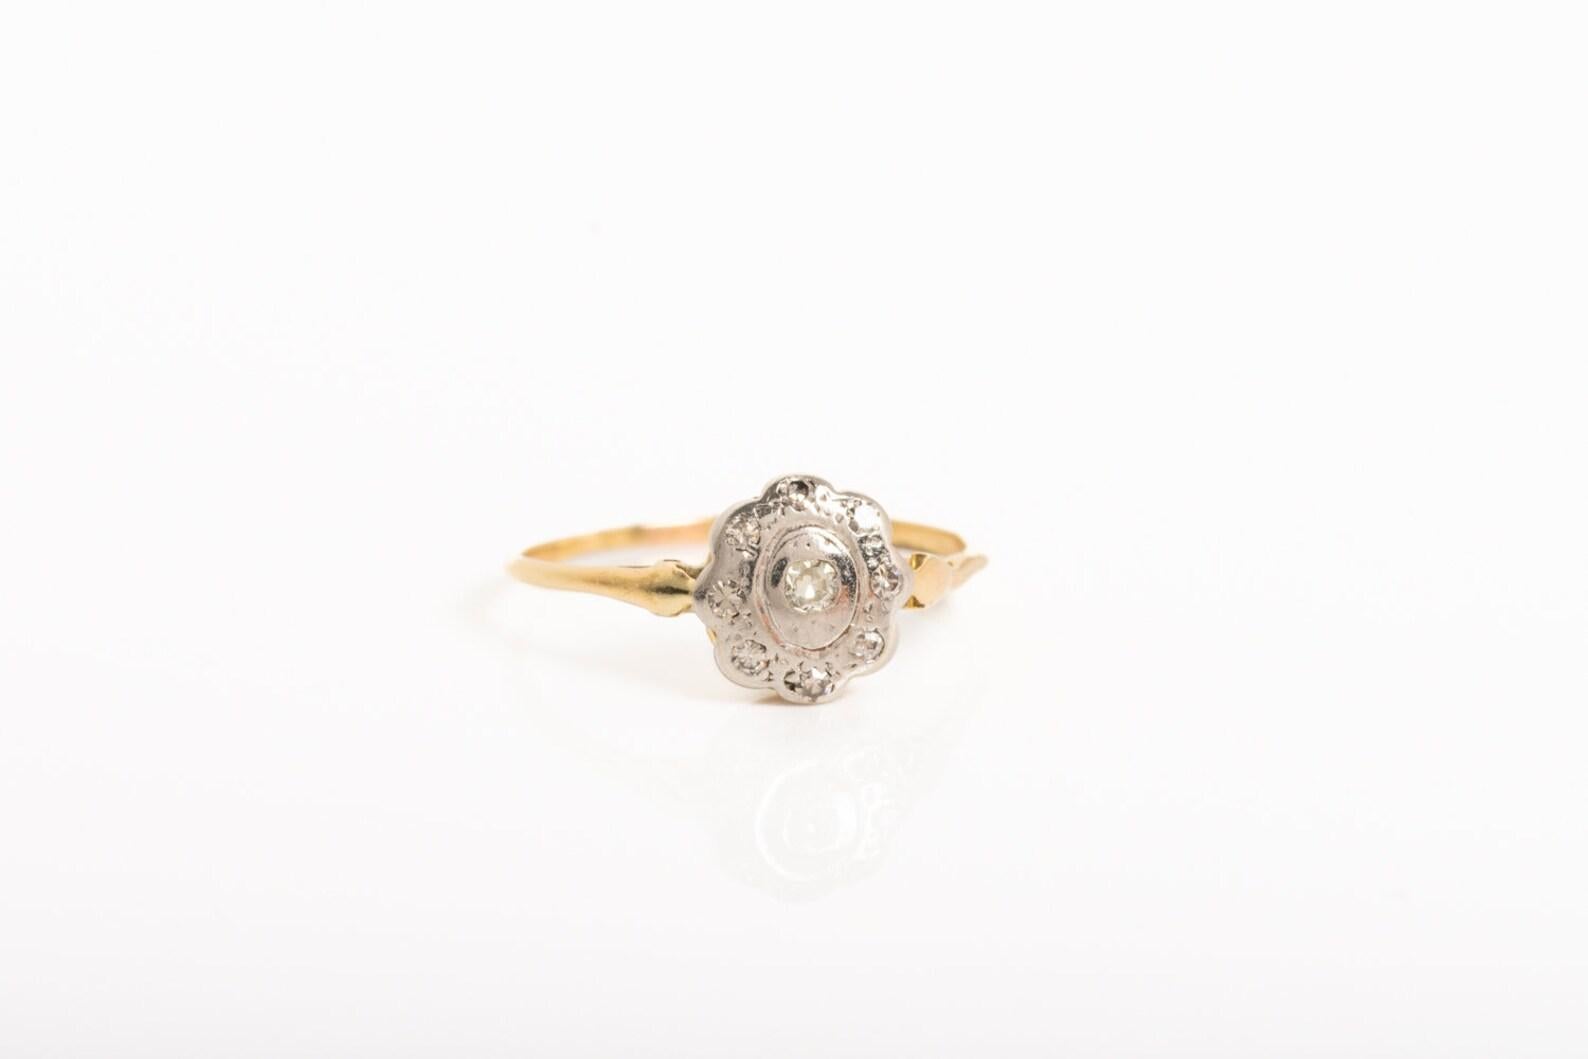 A stunning Art Deco period 18ct gold diamond and platinum daisy ring was made circa 1920. Designed with a 18ct yellow gold band it has a cluster of beautiful nine white diamonds set in daisy flower arrangement in a platinum setting. The number 9